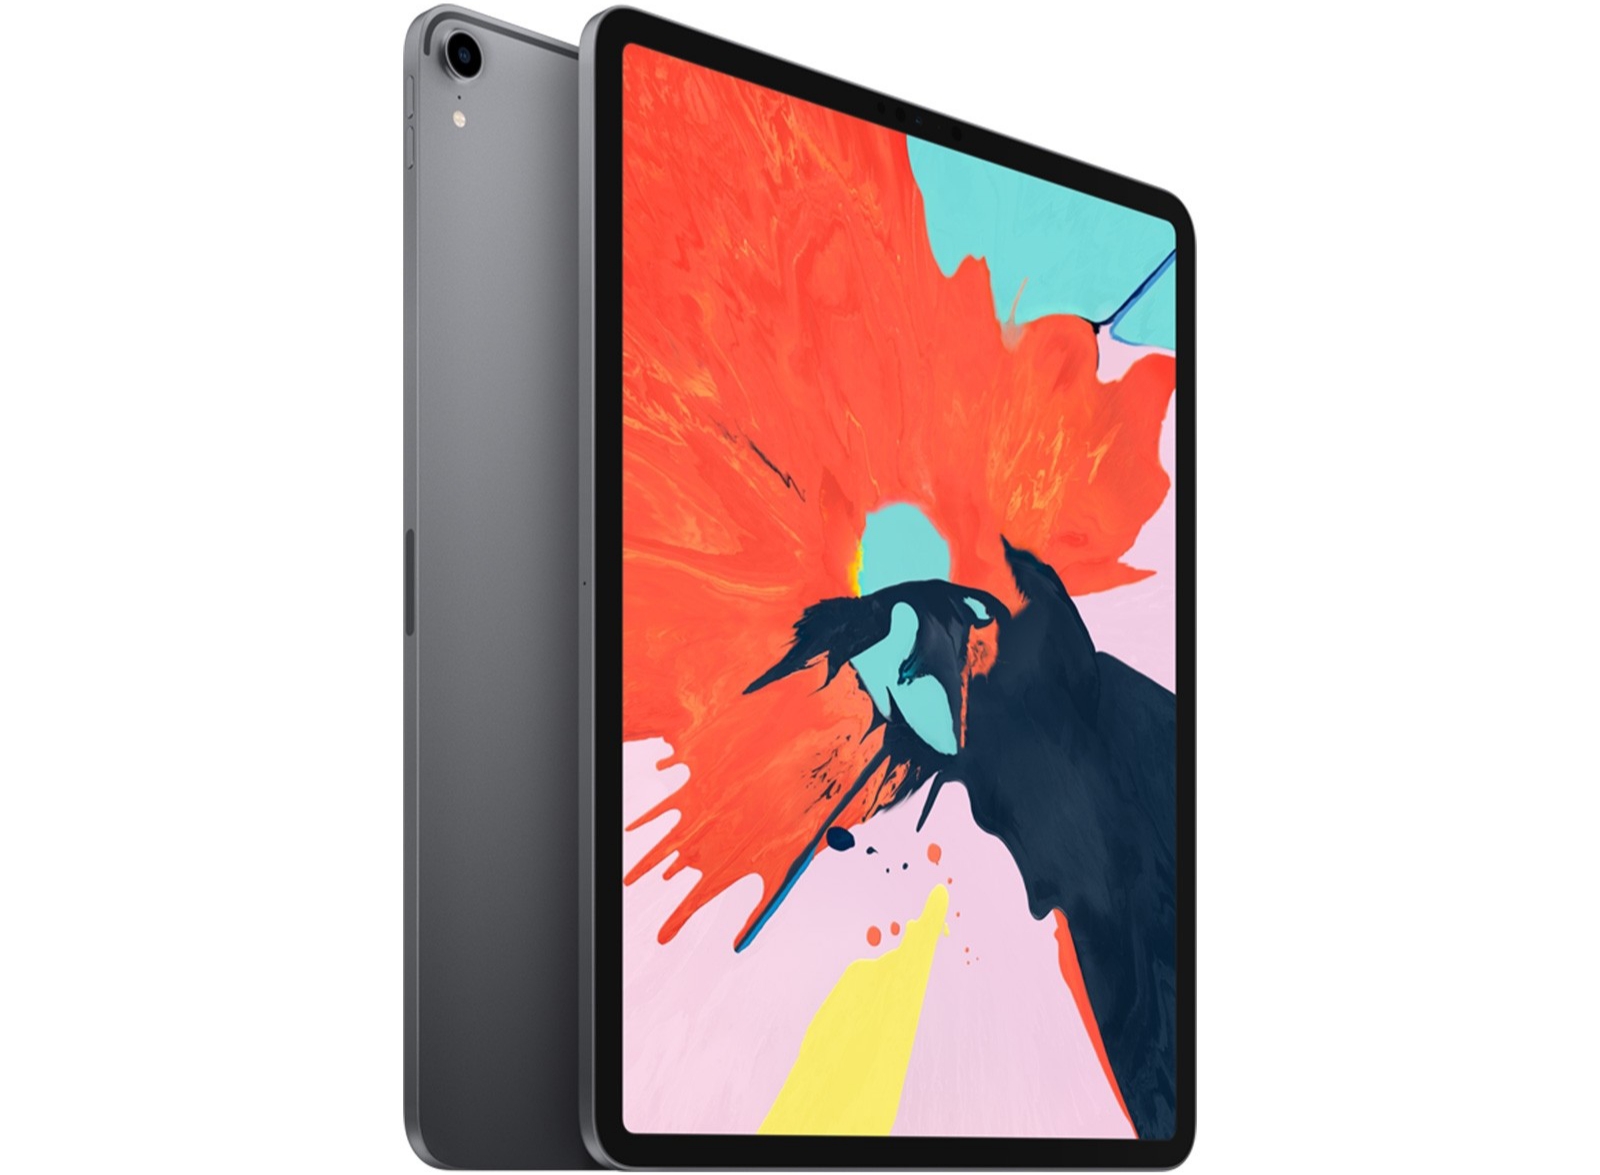 Apple 12.9-Inch iPad Pro (Latest Model) with Wi-Fi 256GB Space